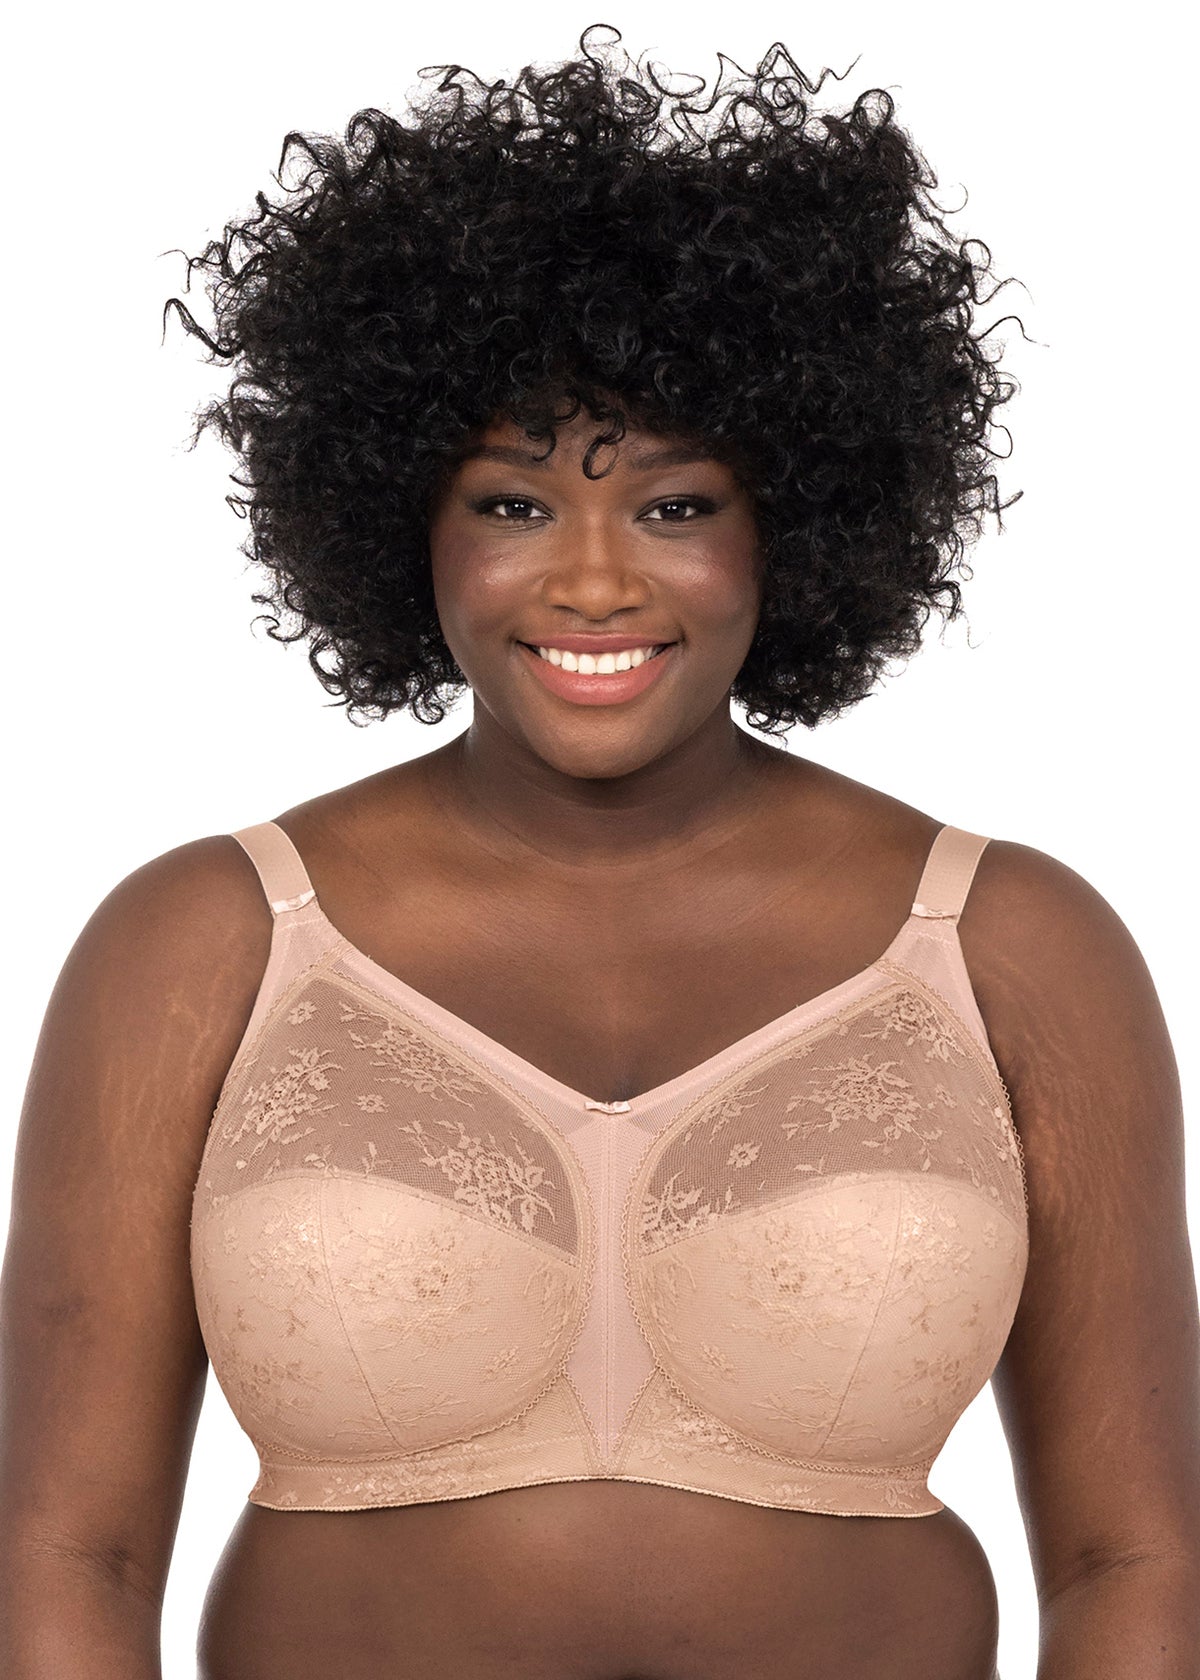 GODDESS VERITY SOFT CUP NON-WIRED BRA - FAWN – Tops & Bottoms